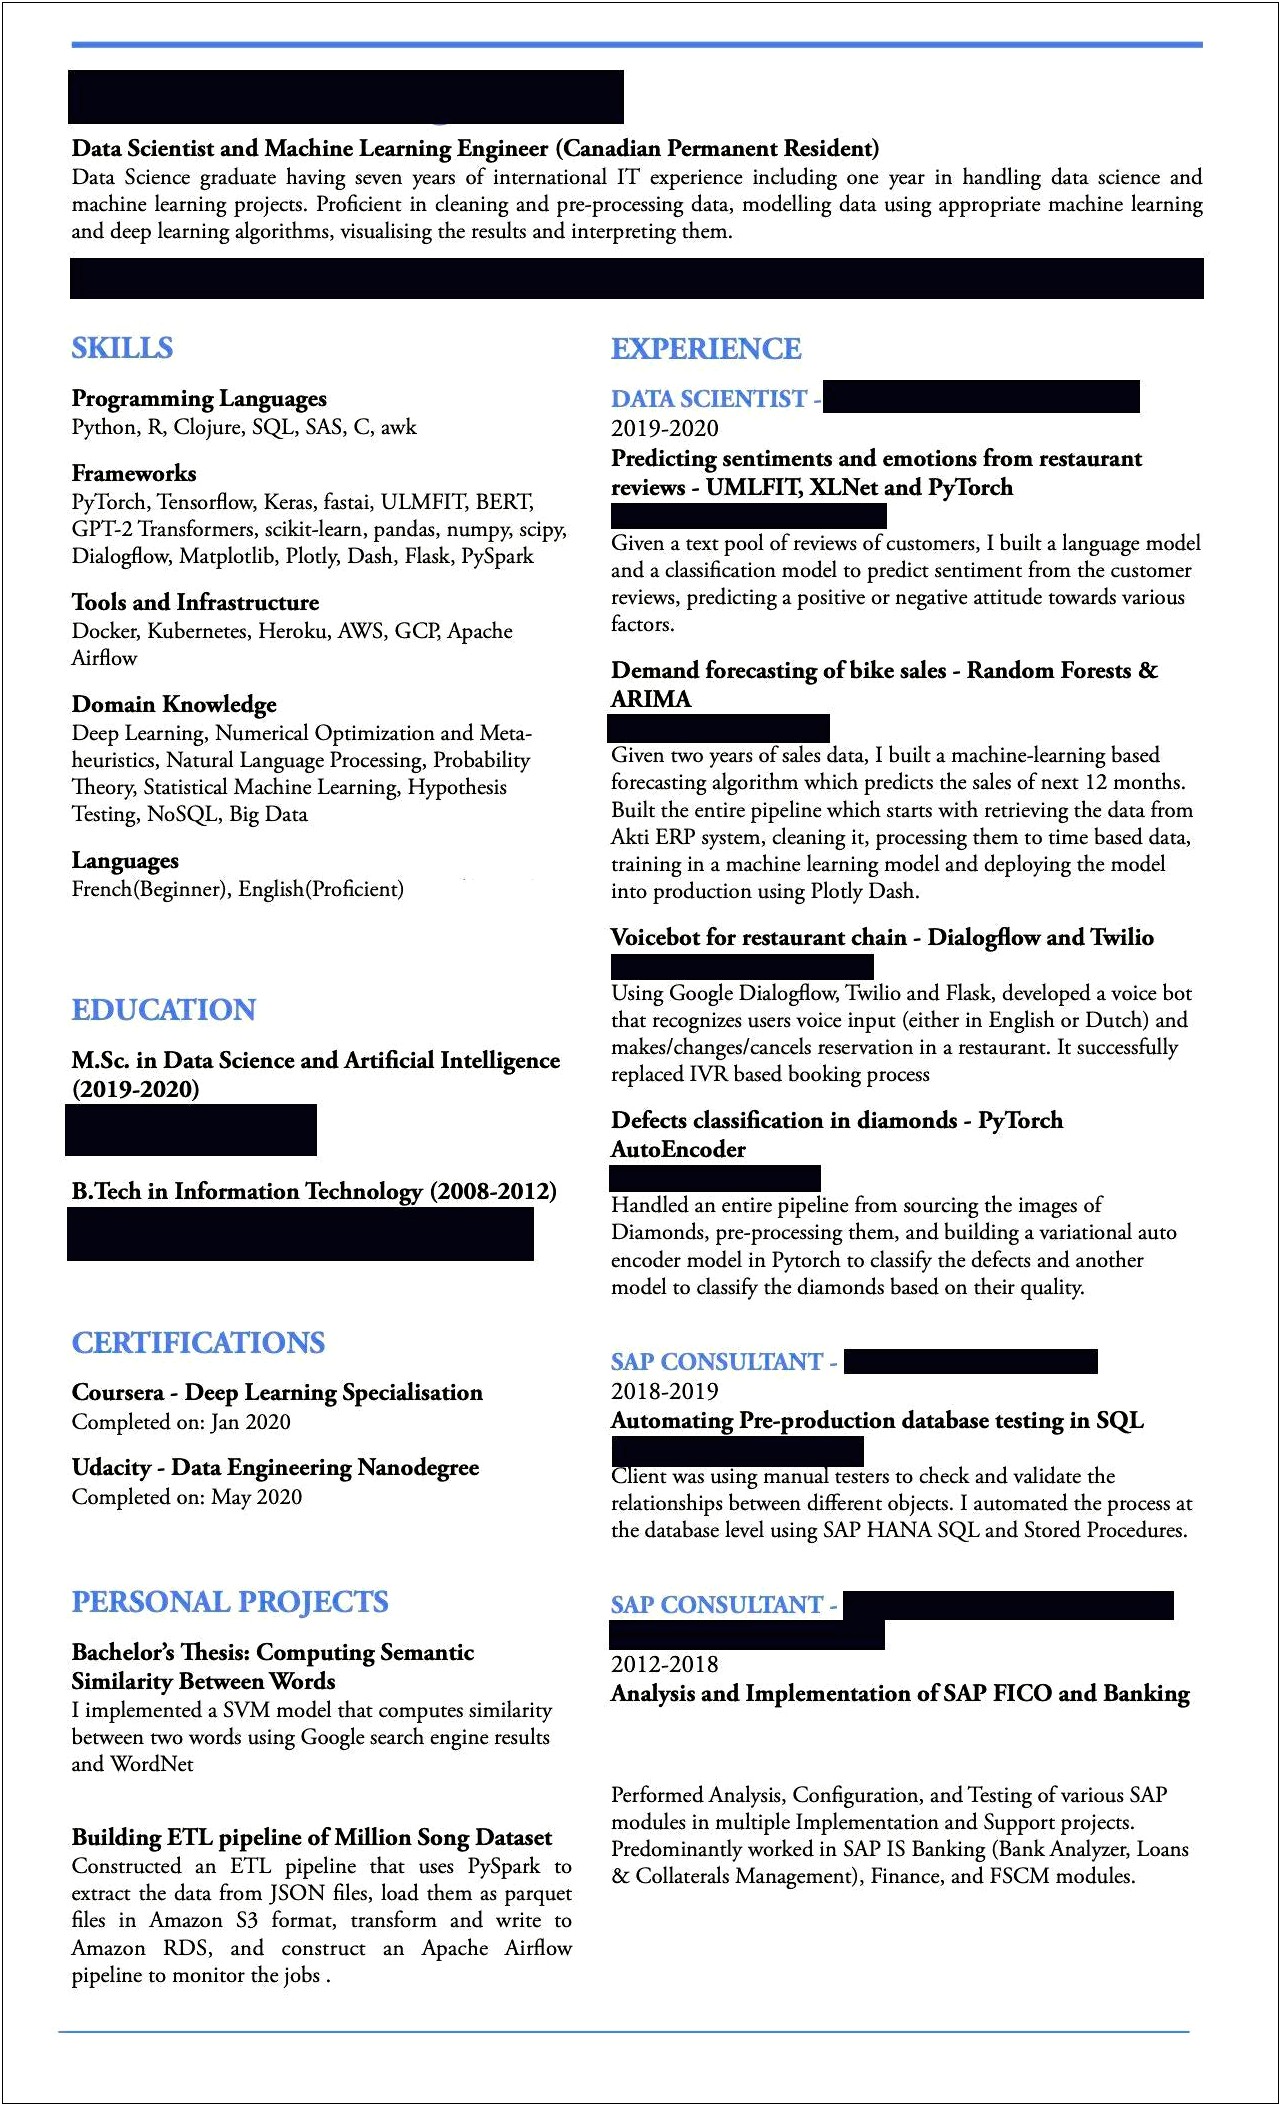 Check My Resume For Data Science Jobs